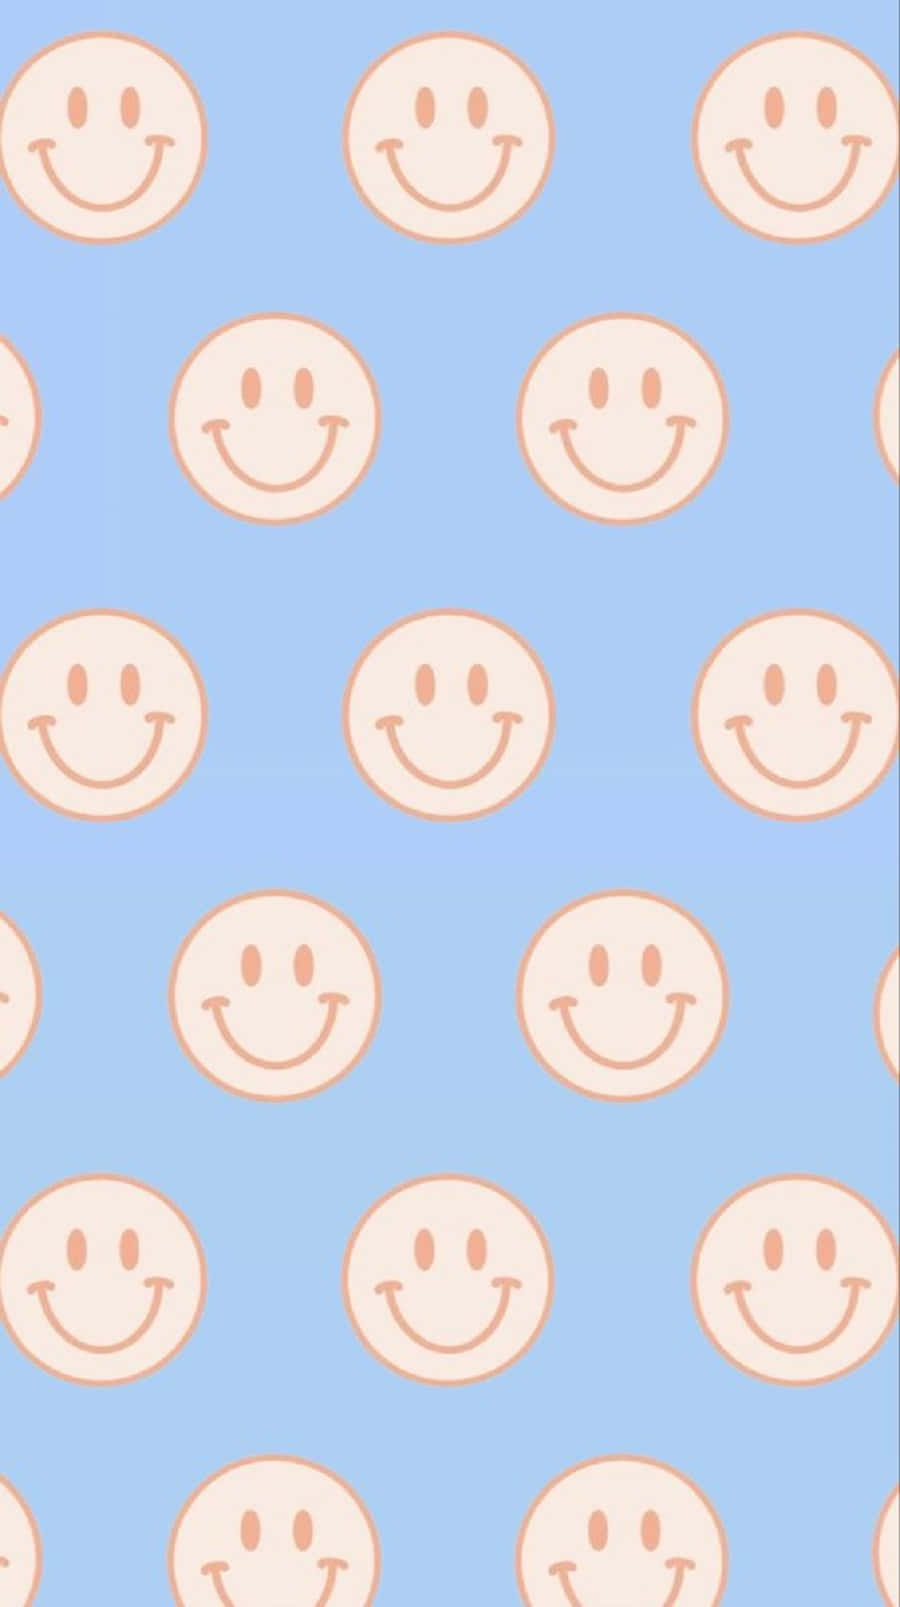 Share 52+ blue smiley face wallpaper aesthetic latest - in.cdgdbentre